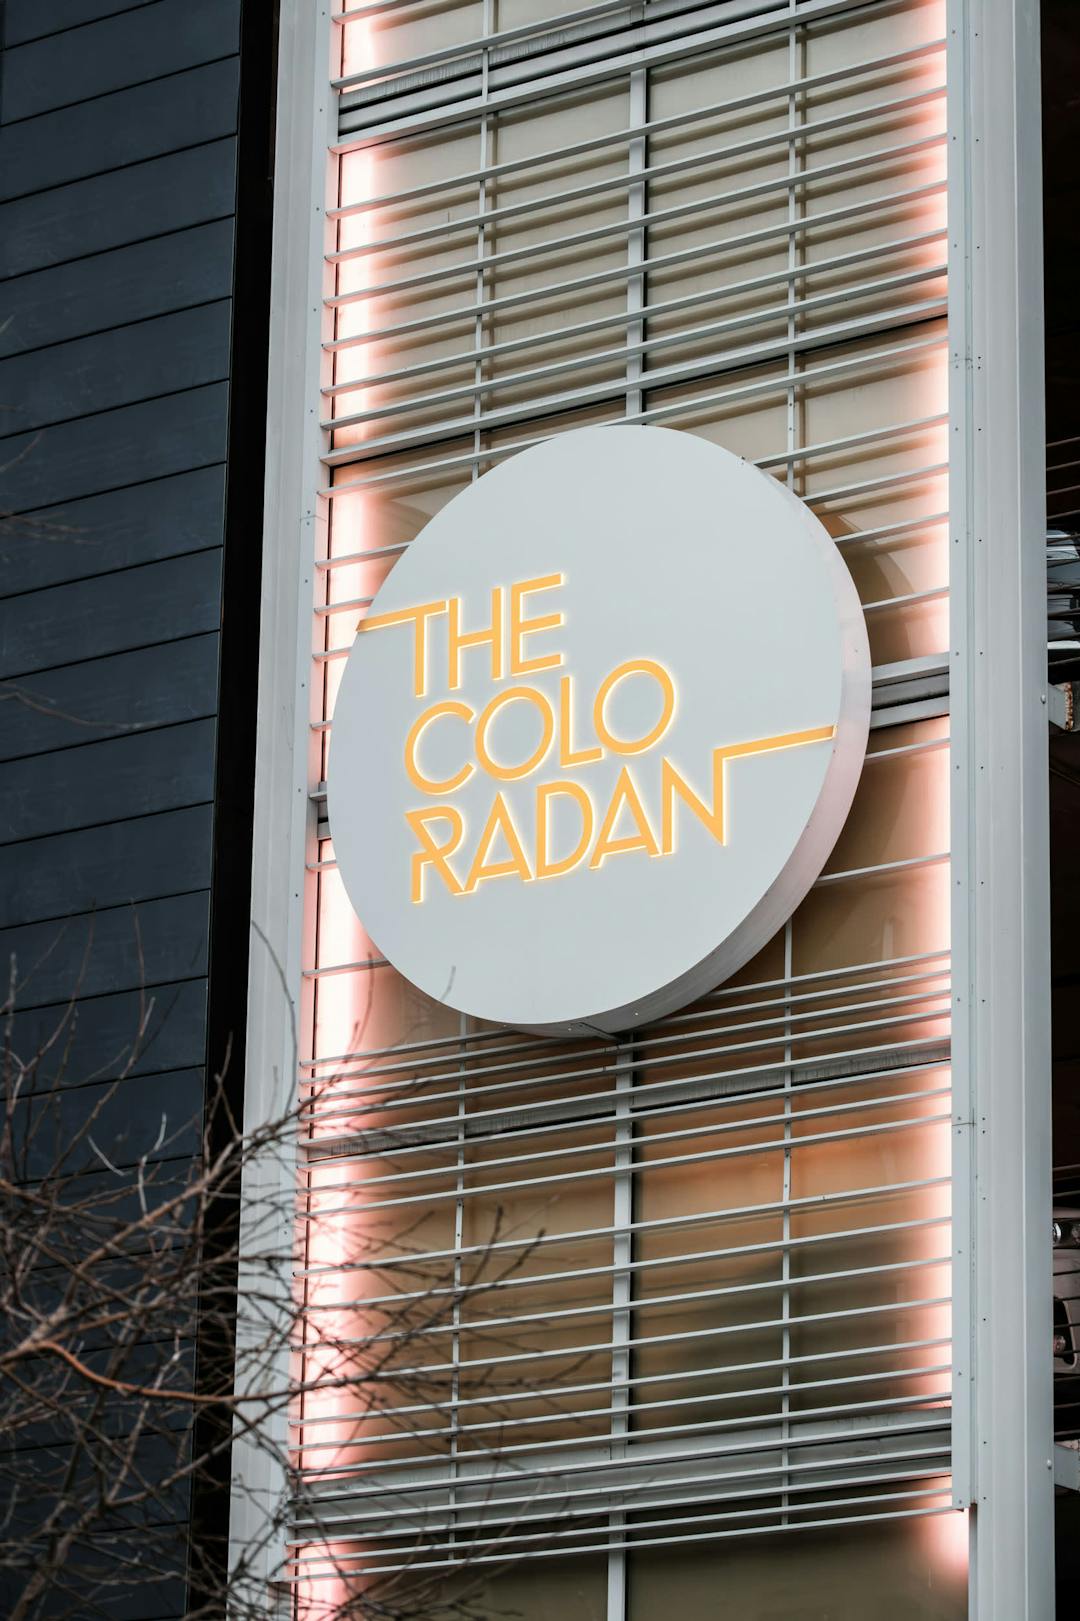 a neon sign on the side of a building that says the colo radant on the side of the building